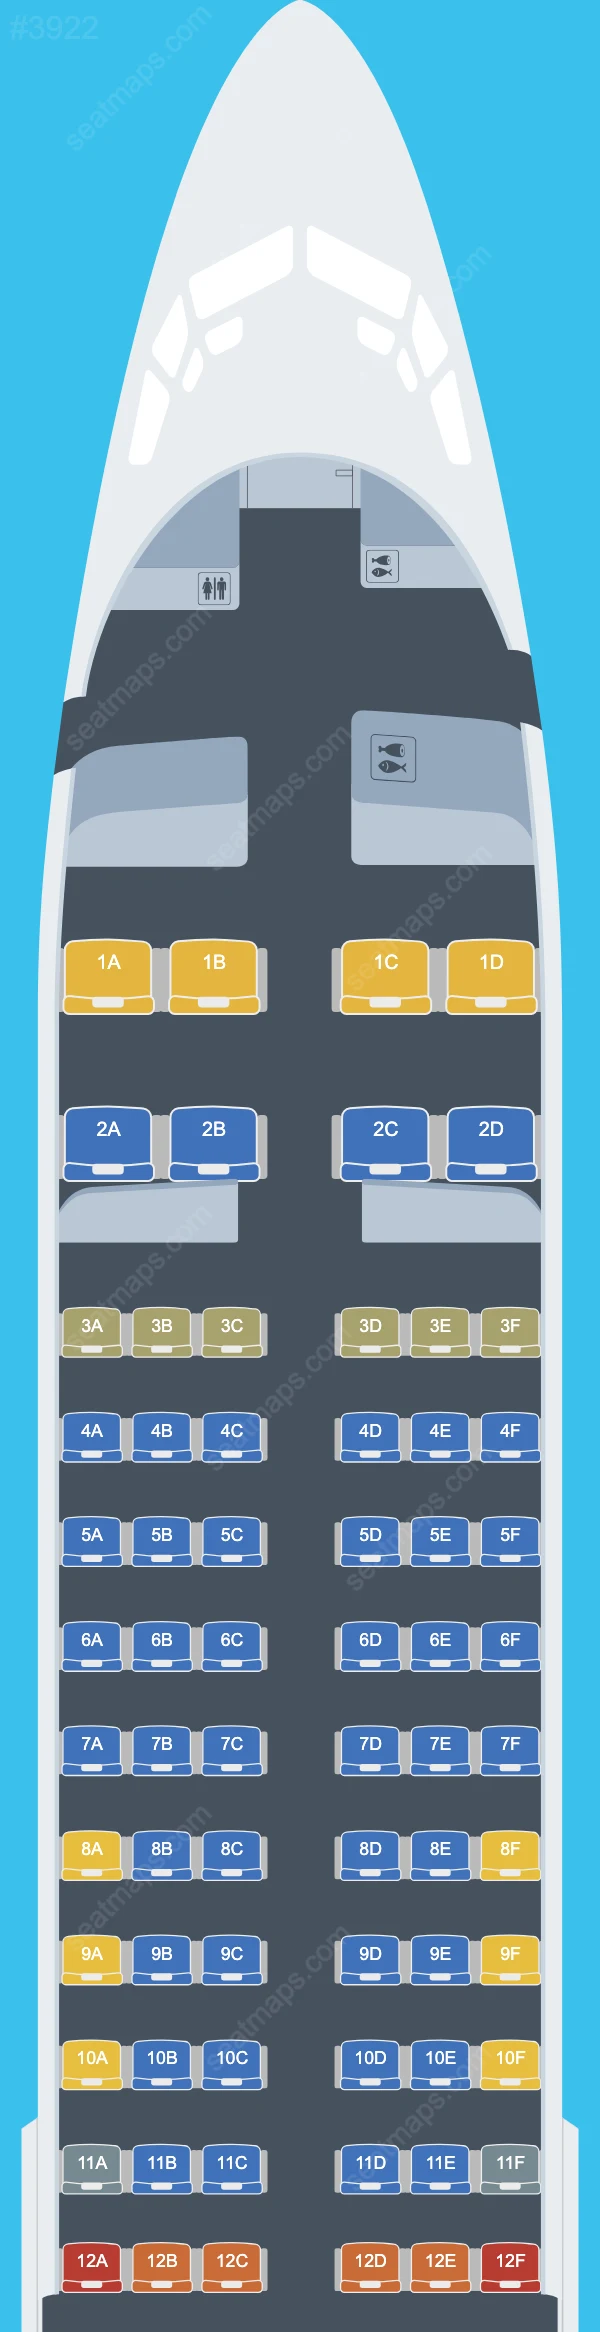 Shandong Airlines Boeing 737 Seat Maps 737-800 V.2